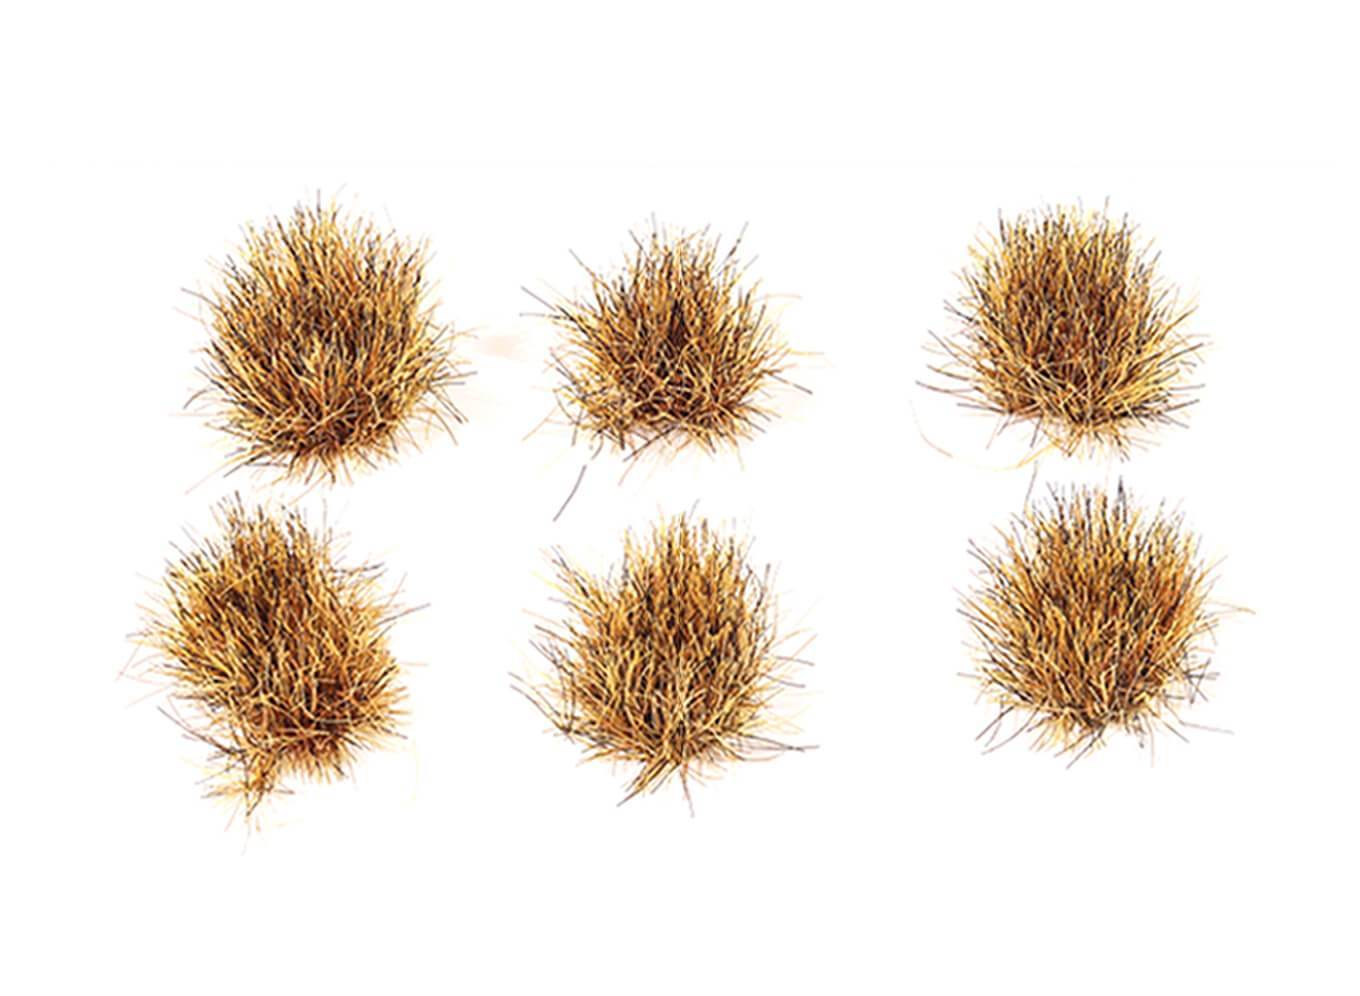 PECO Model Trains | 10mm Self Adhesive Patchy Grass Tufts